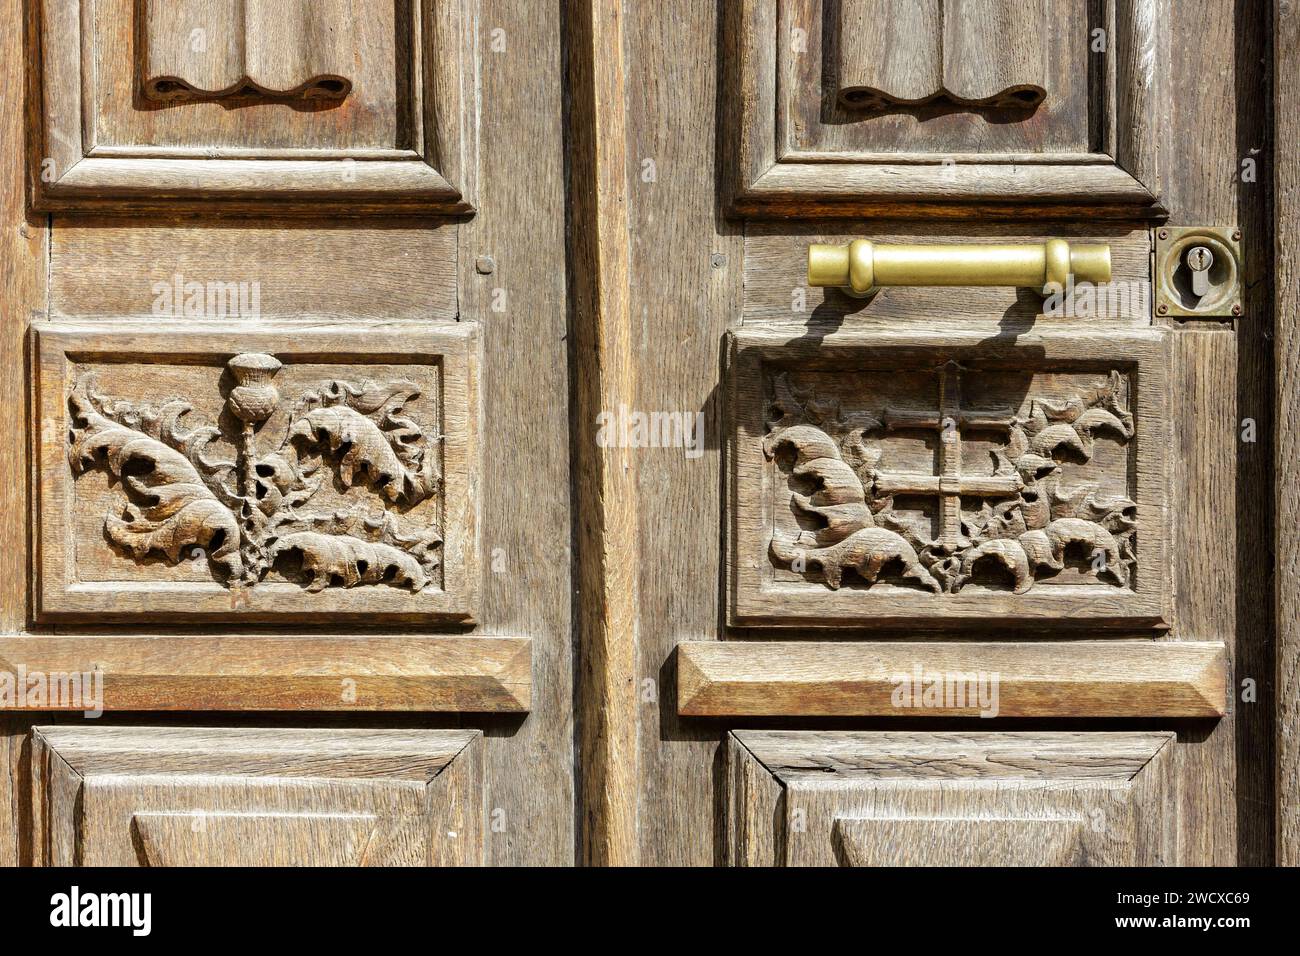 France, Meurthe et Moselle, Nancy, detail of the sculpted door made of wood of an apartment building representing a flower of thistle and the cross of Lorraine located Rue Mon Desert Stock Photo